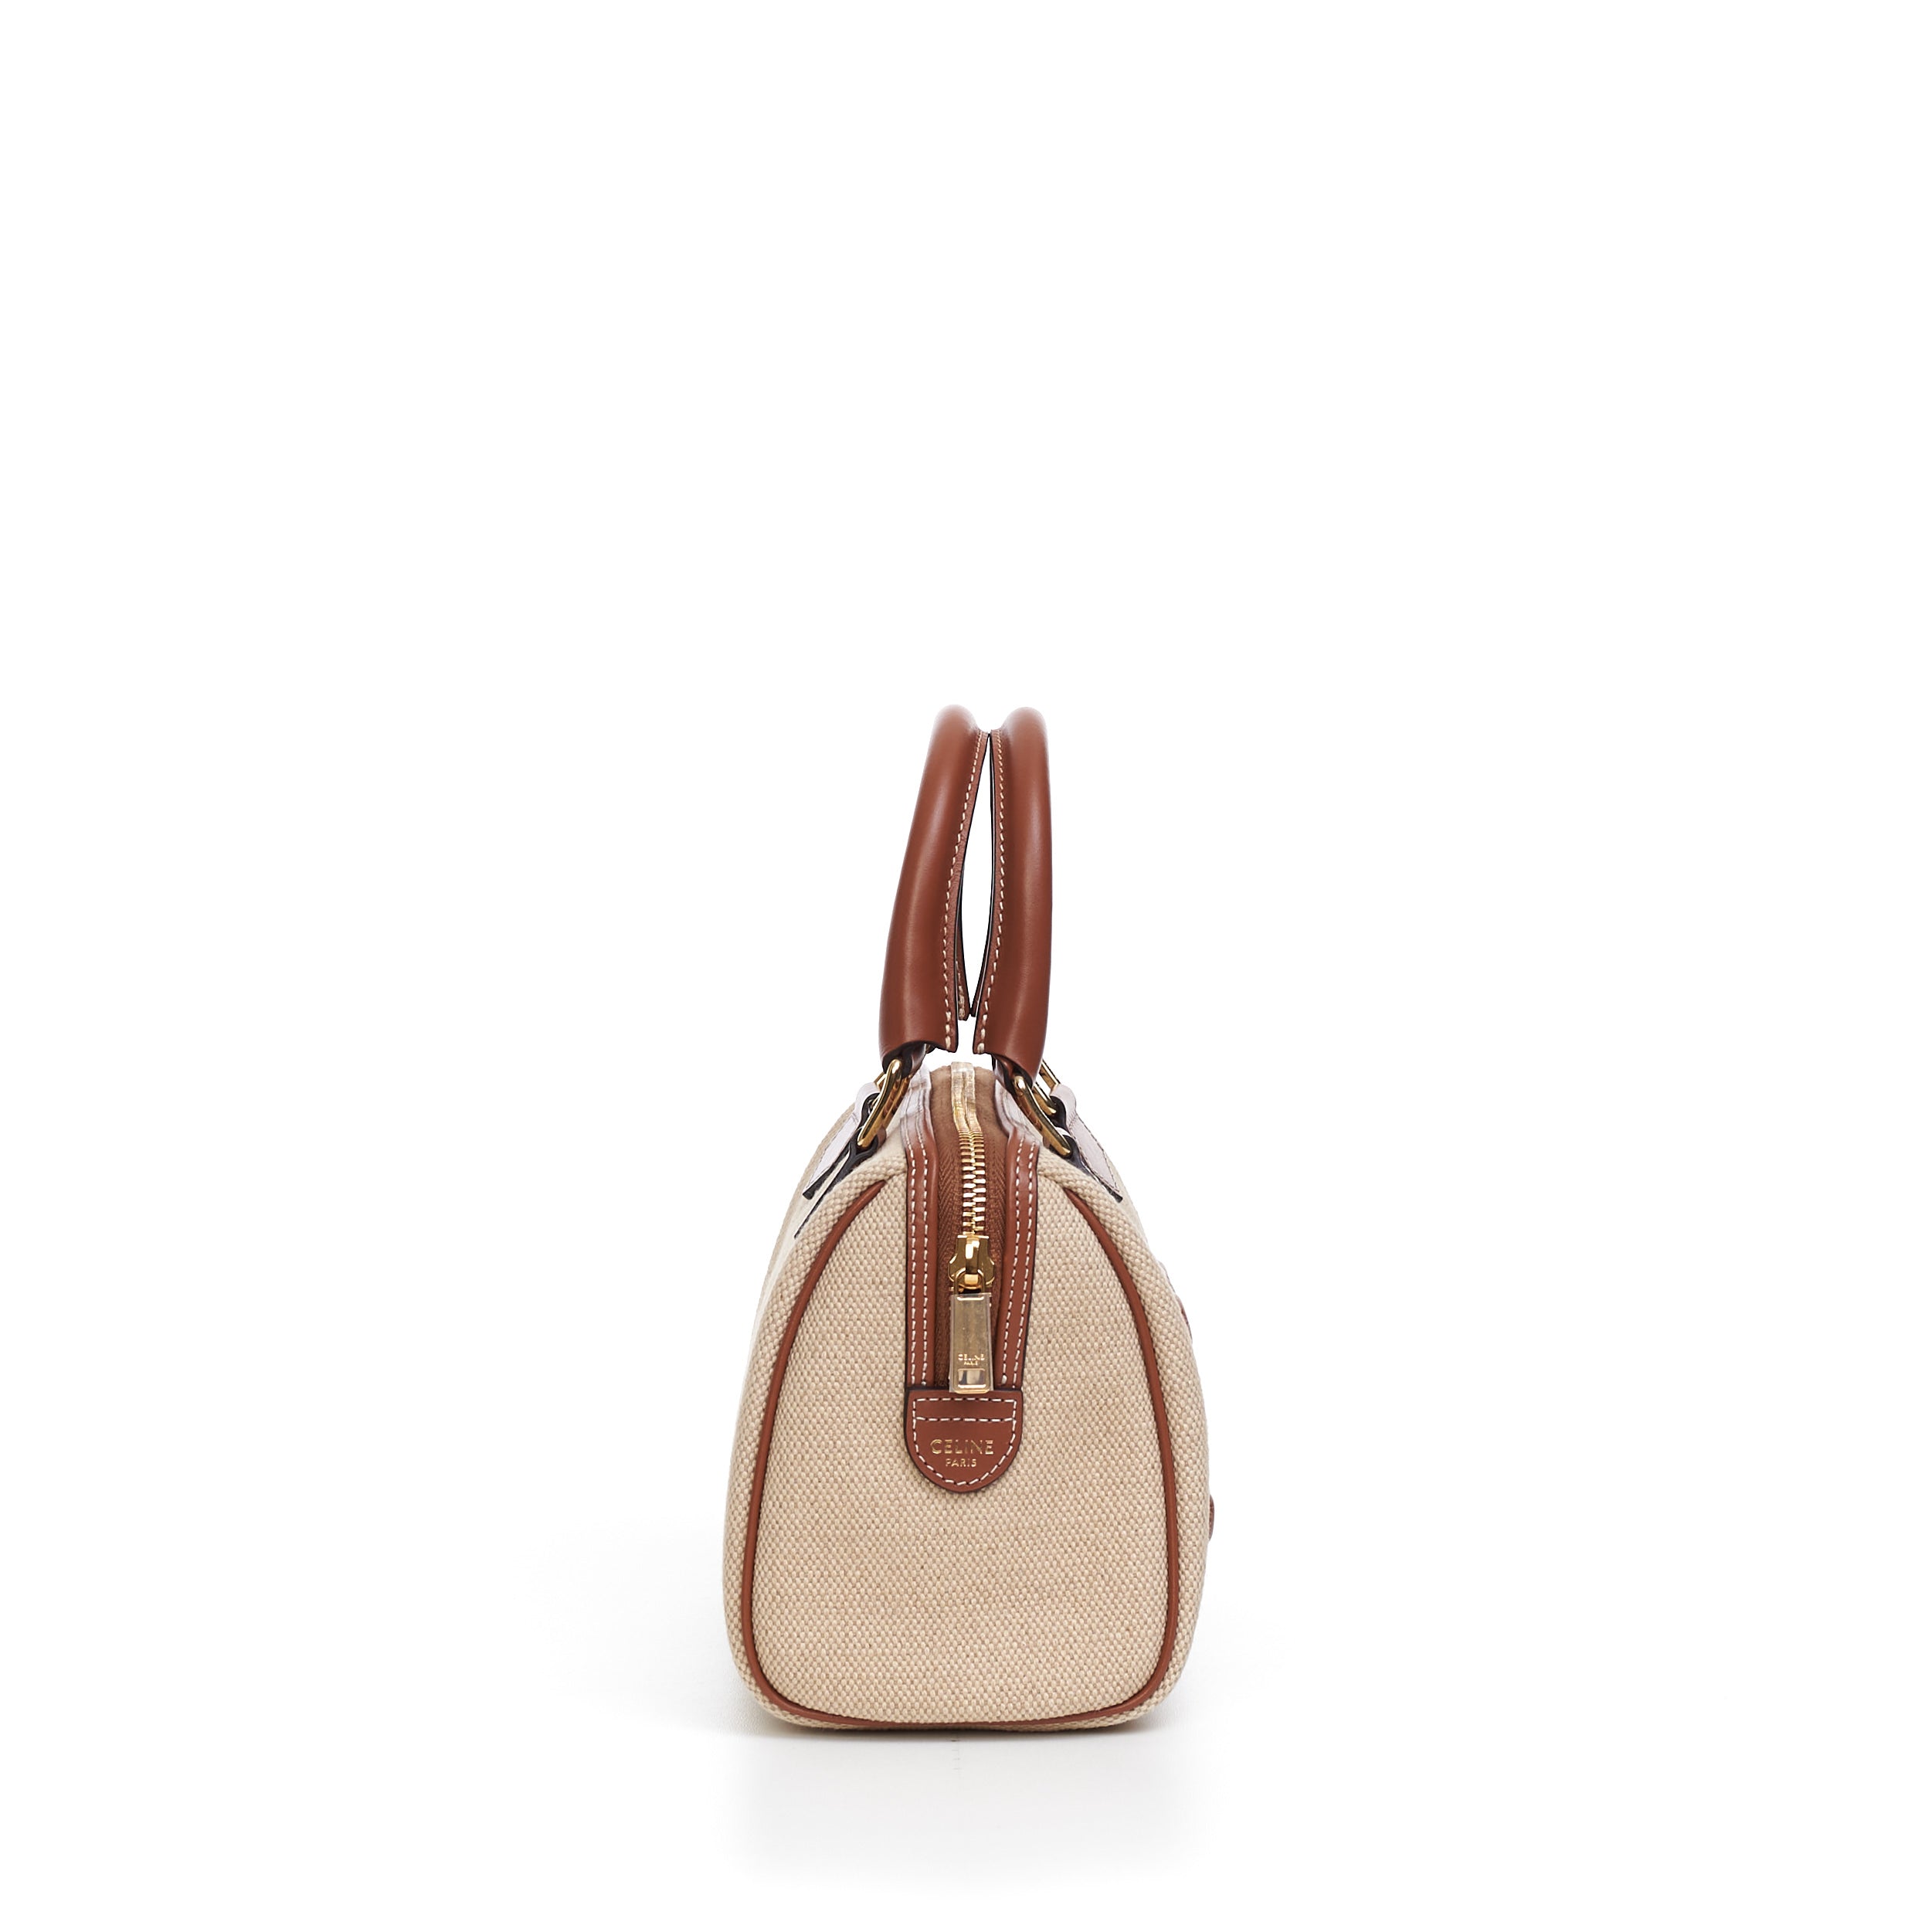 Small Bucket Cuir Triomphe in Textile and Calfskin Leather - Natural / Tan - For Women - Celine